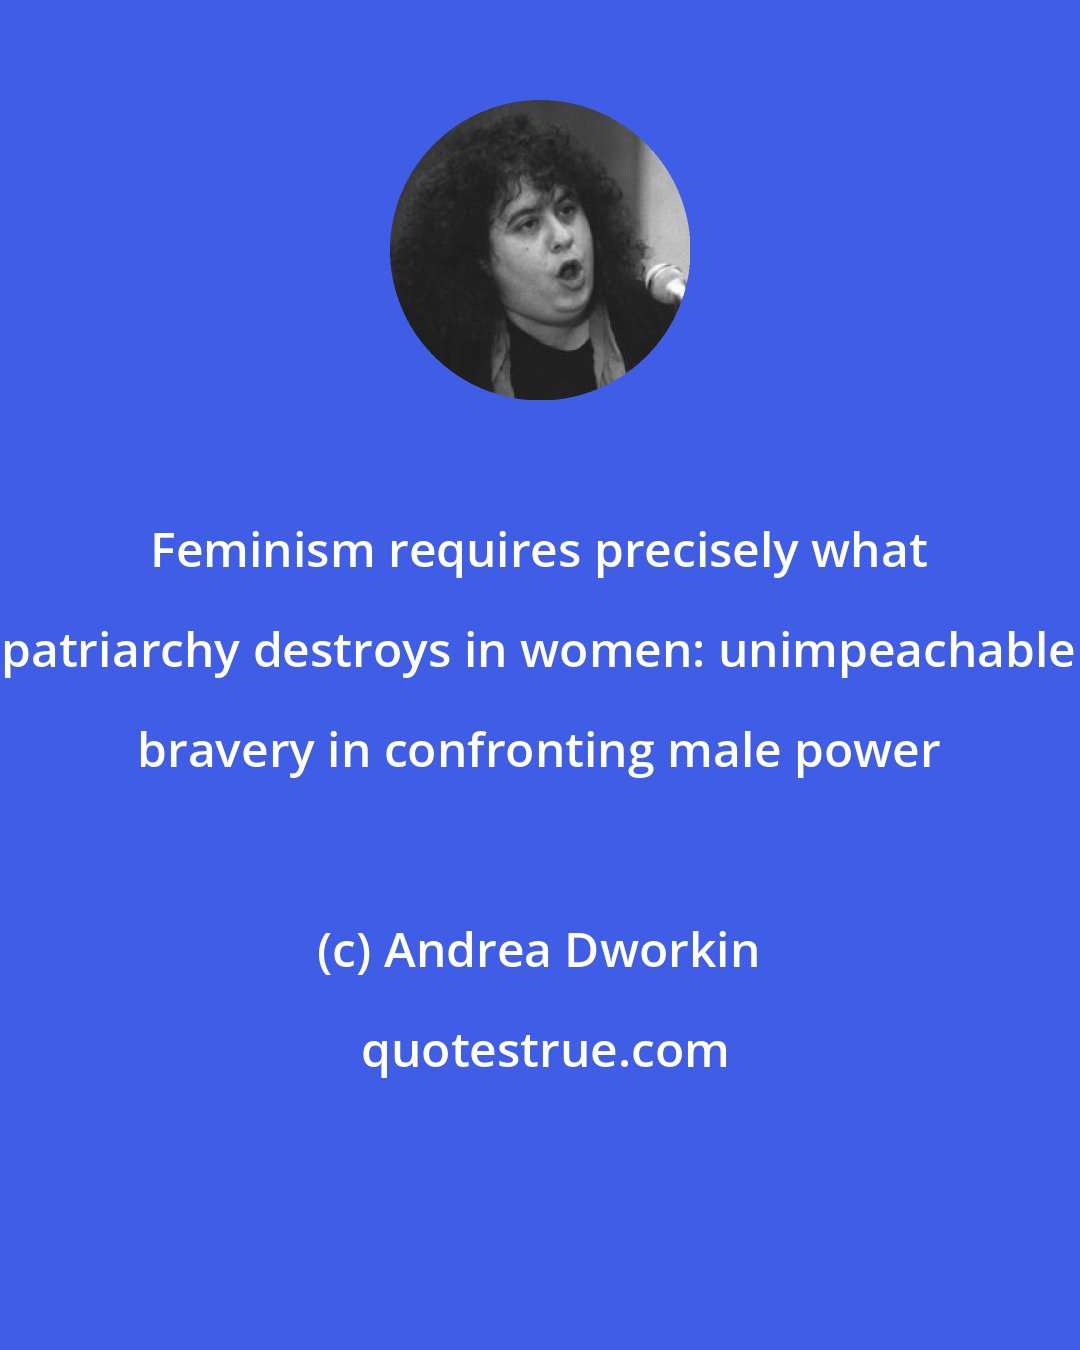 Andrea Dworkin: Feminism requires precisely what patriarchy destroys in women: unimpeachable bravery in confronting male power